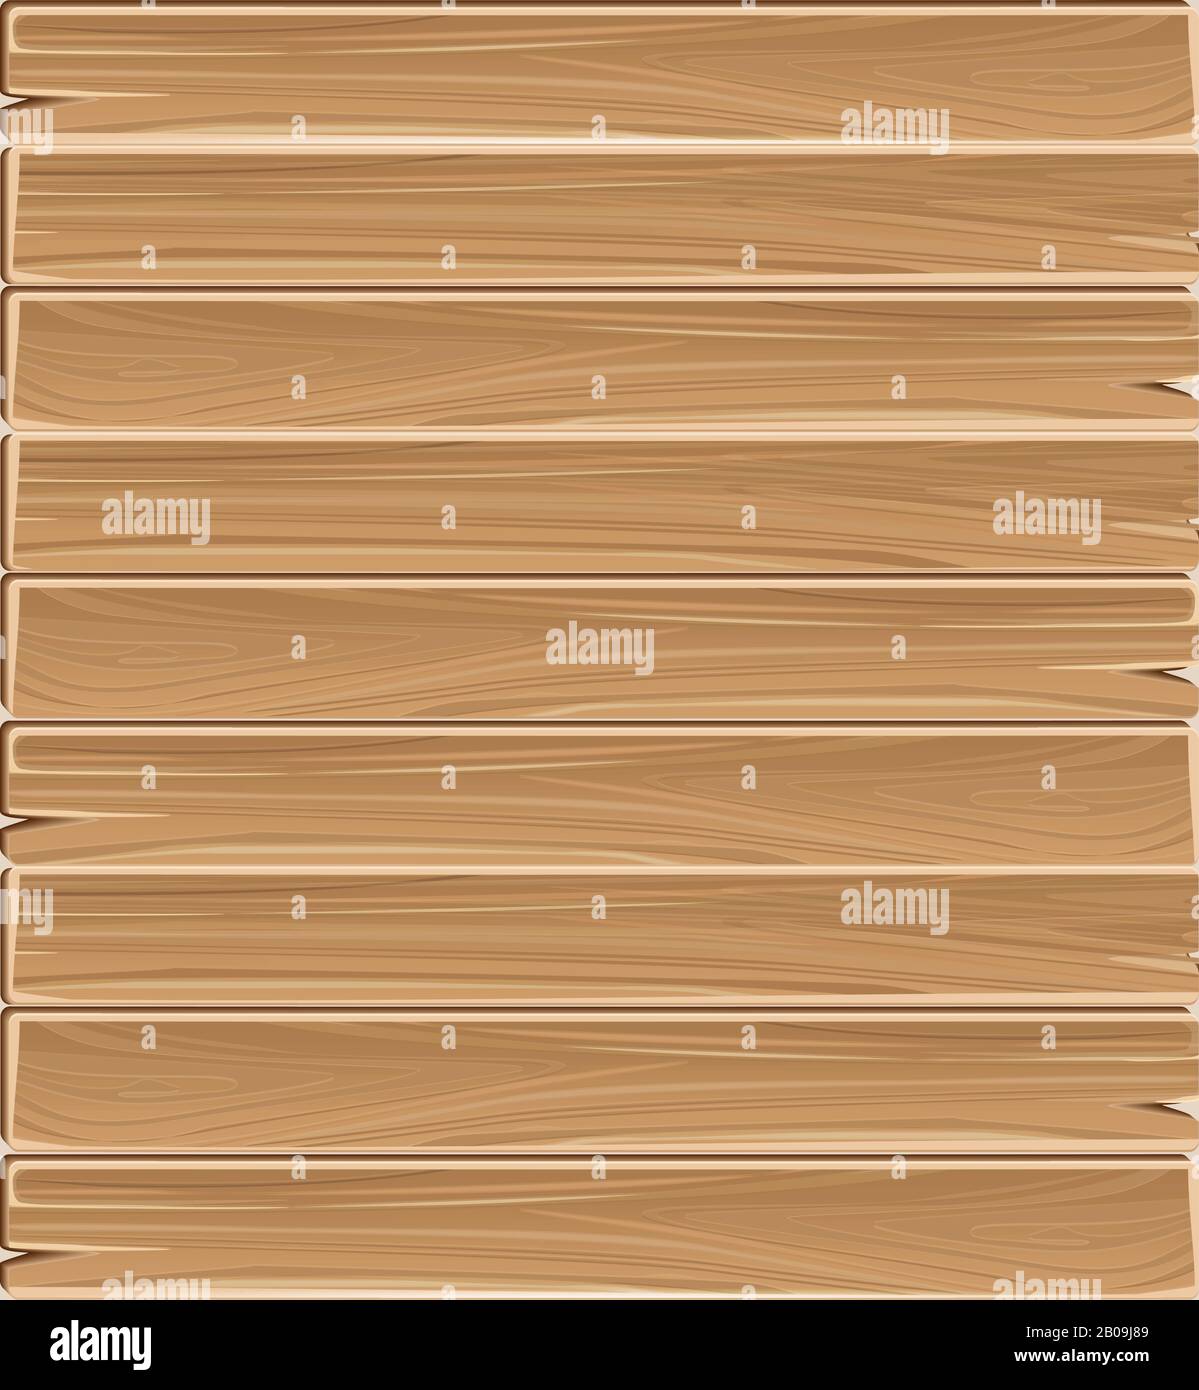 Wooden planks board vector seamless pattern. Background wood texture illustration Stock Vector